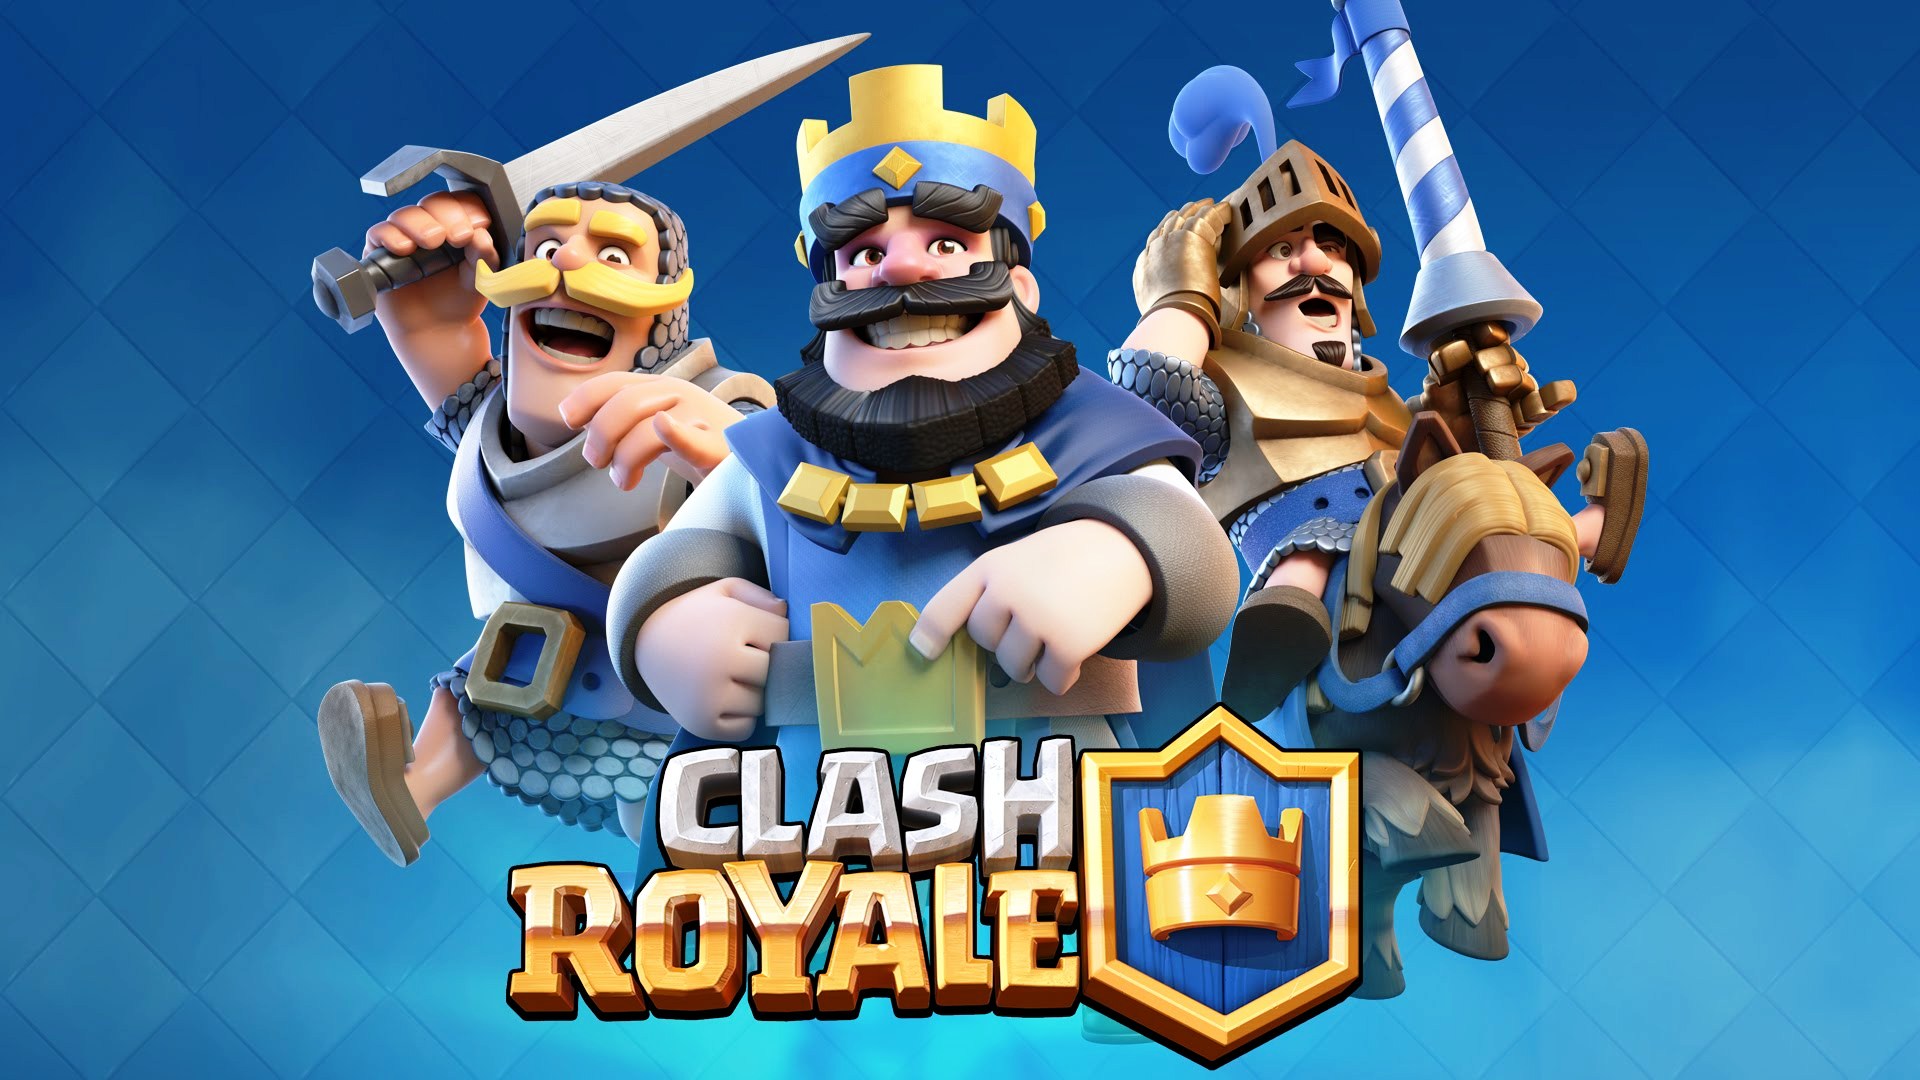 Supercell Clash Royale Hd Hd Games 4k Wallpapers Images Backgrounds Photos And Pictures